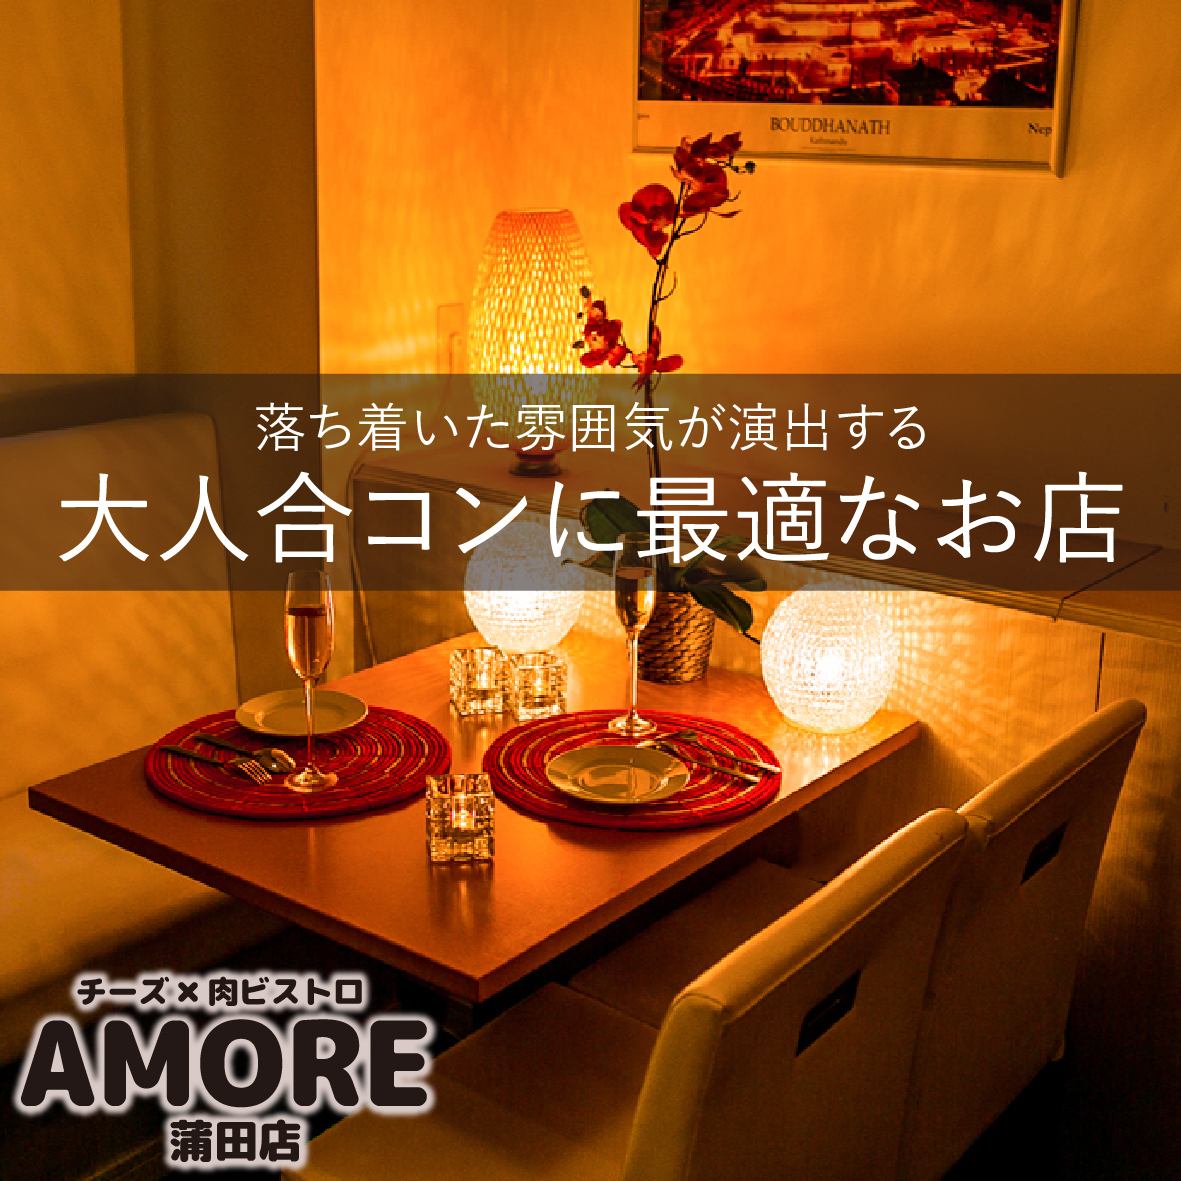 3 minutes walk from Kamata Station ♪ Private rooms available for small groups! All-you-can-drink course starts from 2,480 yen ♪